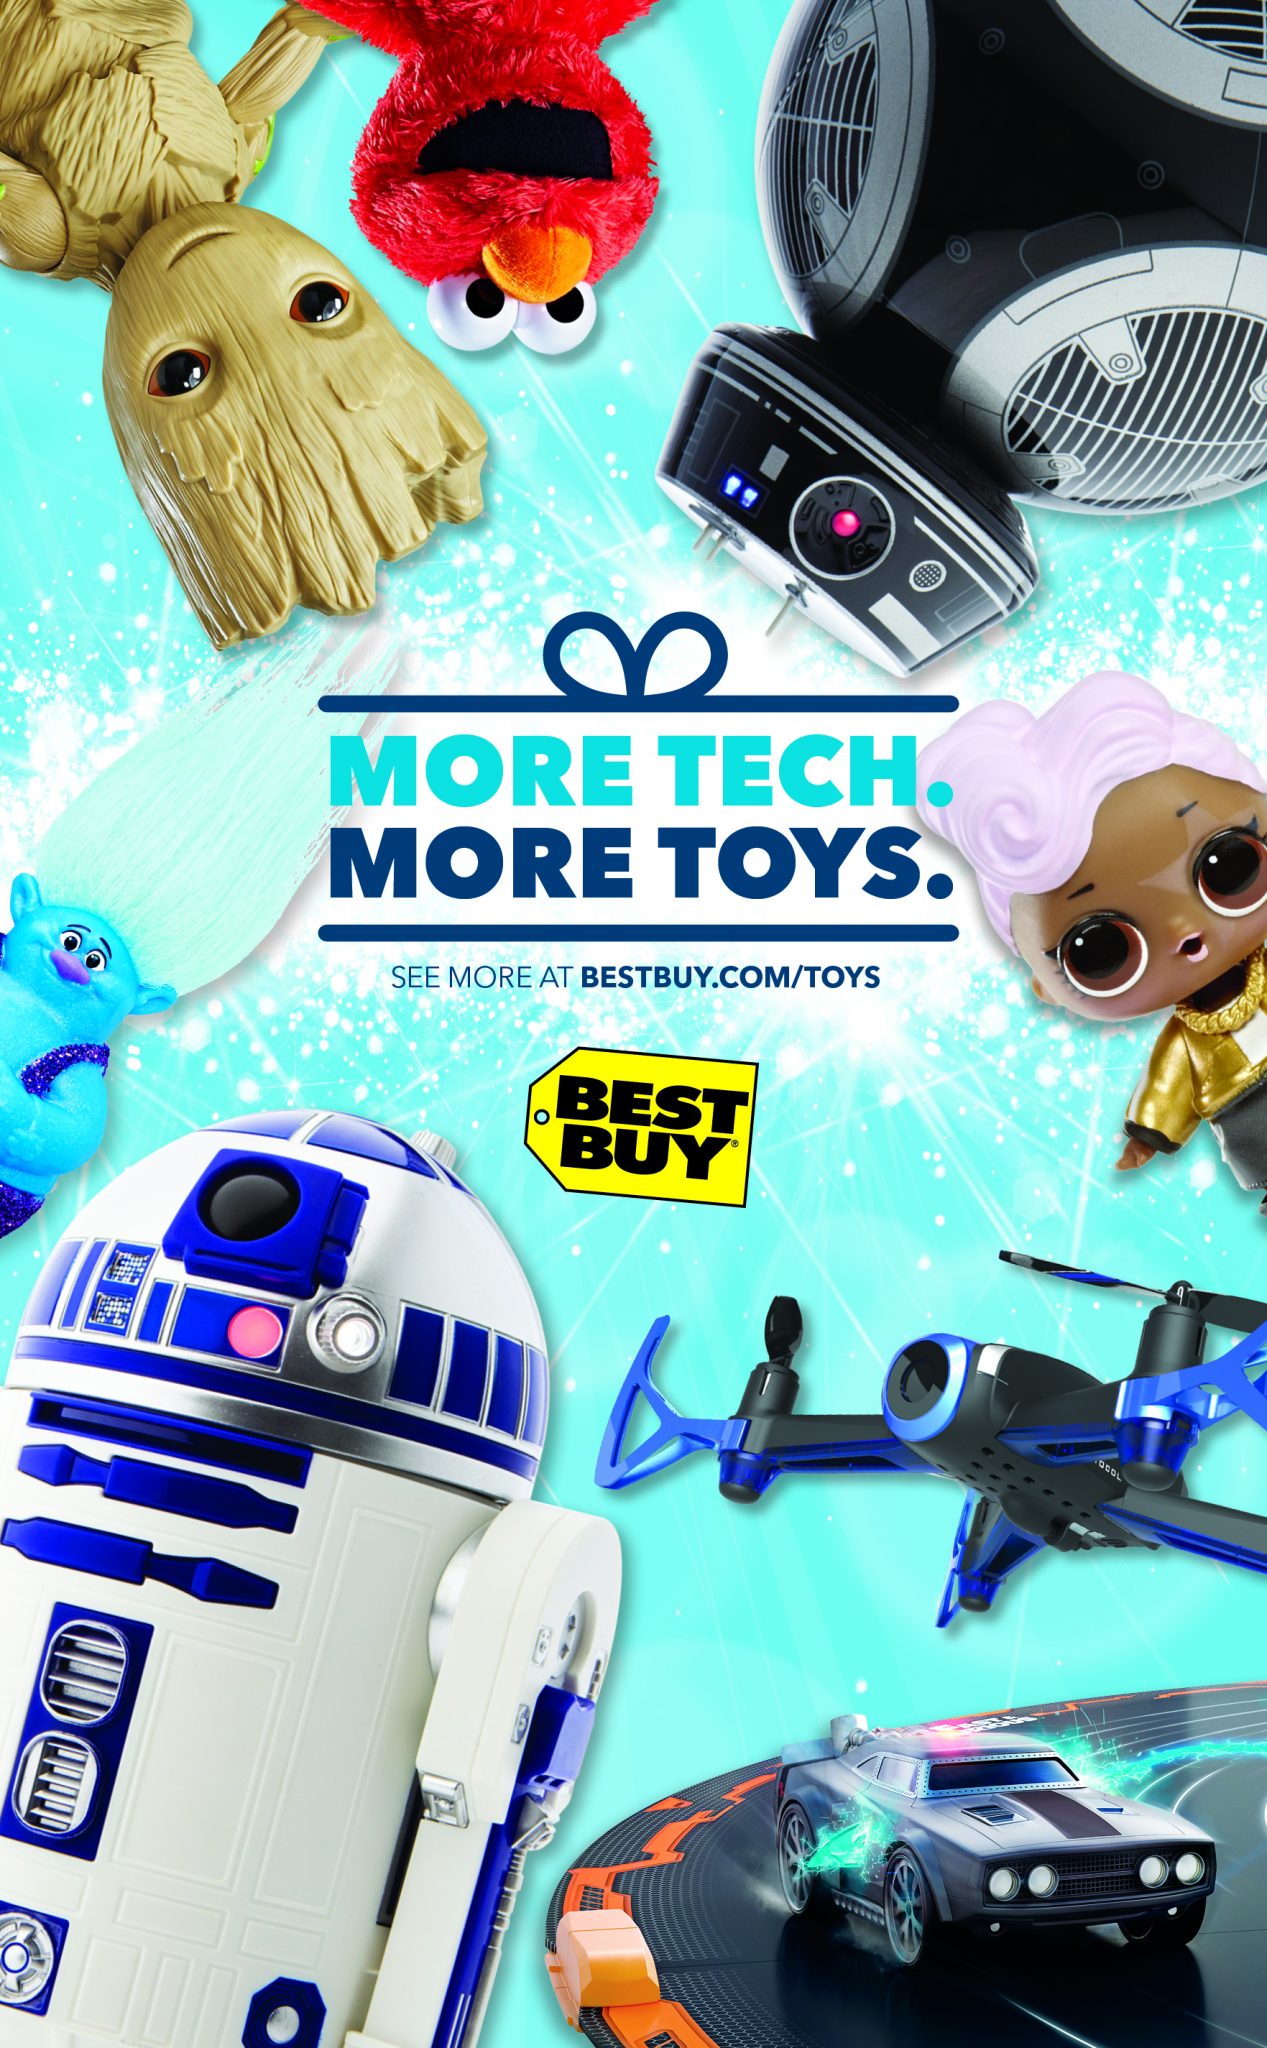 Have You Seen Best Buy’s Toy Catalog?